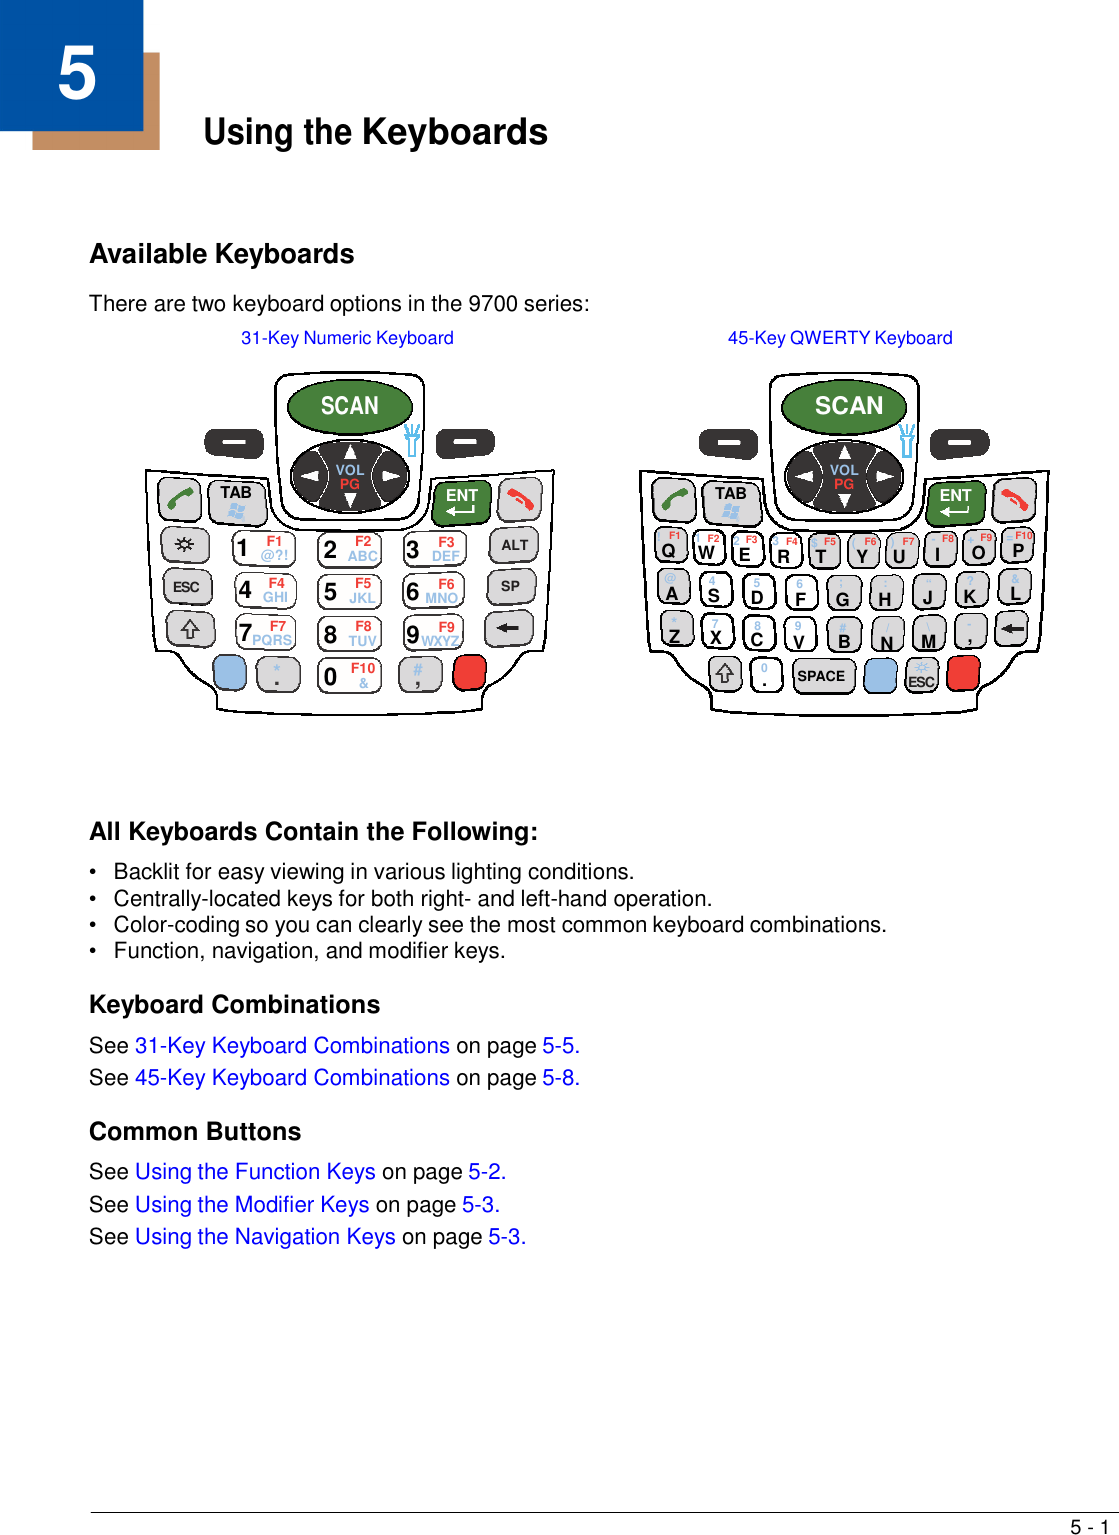 5 - 1    0&amp;.5 Using the Keyboards     Available Keyboards  There are two keyboard options in the 9700 series:  31-Key Numeric Keyboard  45-Key QWERTY Keyboard   SCAN SCAN   VOL PG TAB  ENT ® VOL PG TAB  ENT ® 1  F1 F2  F3  ALT !  F1 1 F2 2 F3 3 F4  $ F5     (  F6 )  F7 - F8 + F9 = F10 @?! 2 ABC 3 DEF Q  W  E  R  T  Y  U  I  O  P  ESC 4  F4 F5  F6  SP @  4  5  6  ;  :  “  ?  &amp; GHI 5 JKL 6 MNO A  S  D  F  G  H  J  K  L 7  F7 F8  F9 * 7  8  9  #  /  \  - PQRS 8 TUV 9WXYZ Z  X  C  V B  N  M  , *. F10 #, 0 SPACE  ESC       All Keyboards Contain the Following:  •   Backlit for easy viewing in various lighting conditions. •   Centrally-located keys for both right- and left-hand operation. •   Color-coding so you can clearly see the most common keyboard combinations. •   Function, navigation, and modifier keys.  Keyboard Combinations  See 31-Key Keyboard Combinations on page 5-5. See 45-Key Keyboard Combinations on page 5-8.  Common Buttons  See Using the Function Keys on page 5-2. See Using the Modifier Keys on page 5-3. See Using the Navigation Keys on page 5-3. 